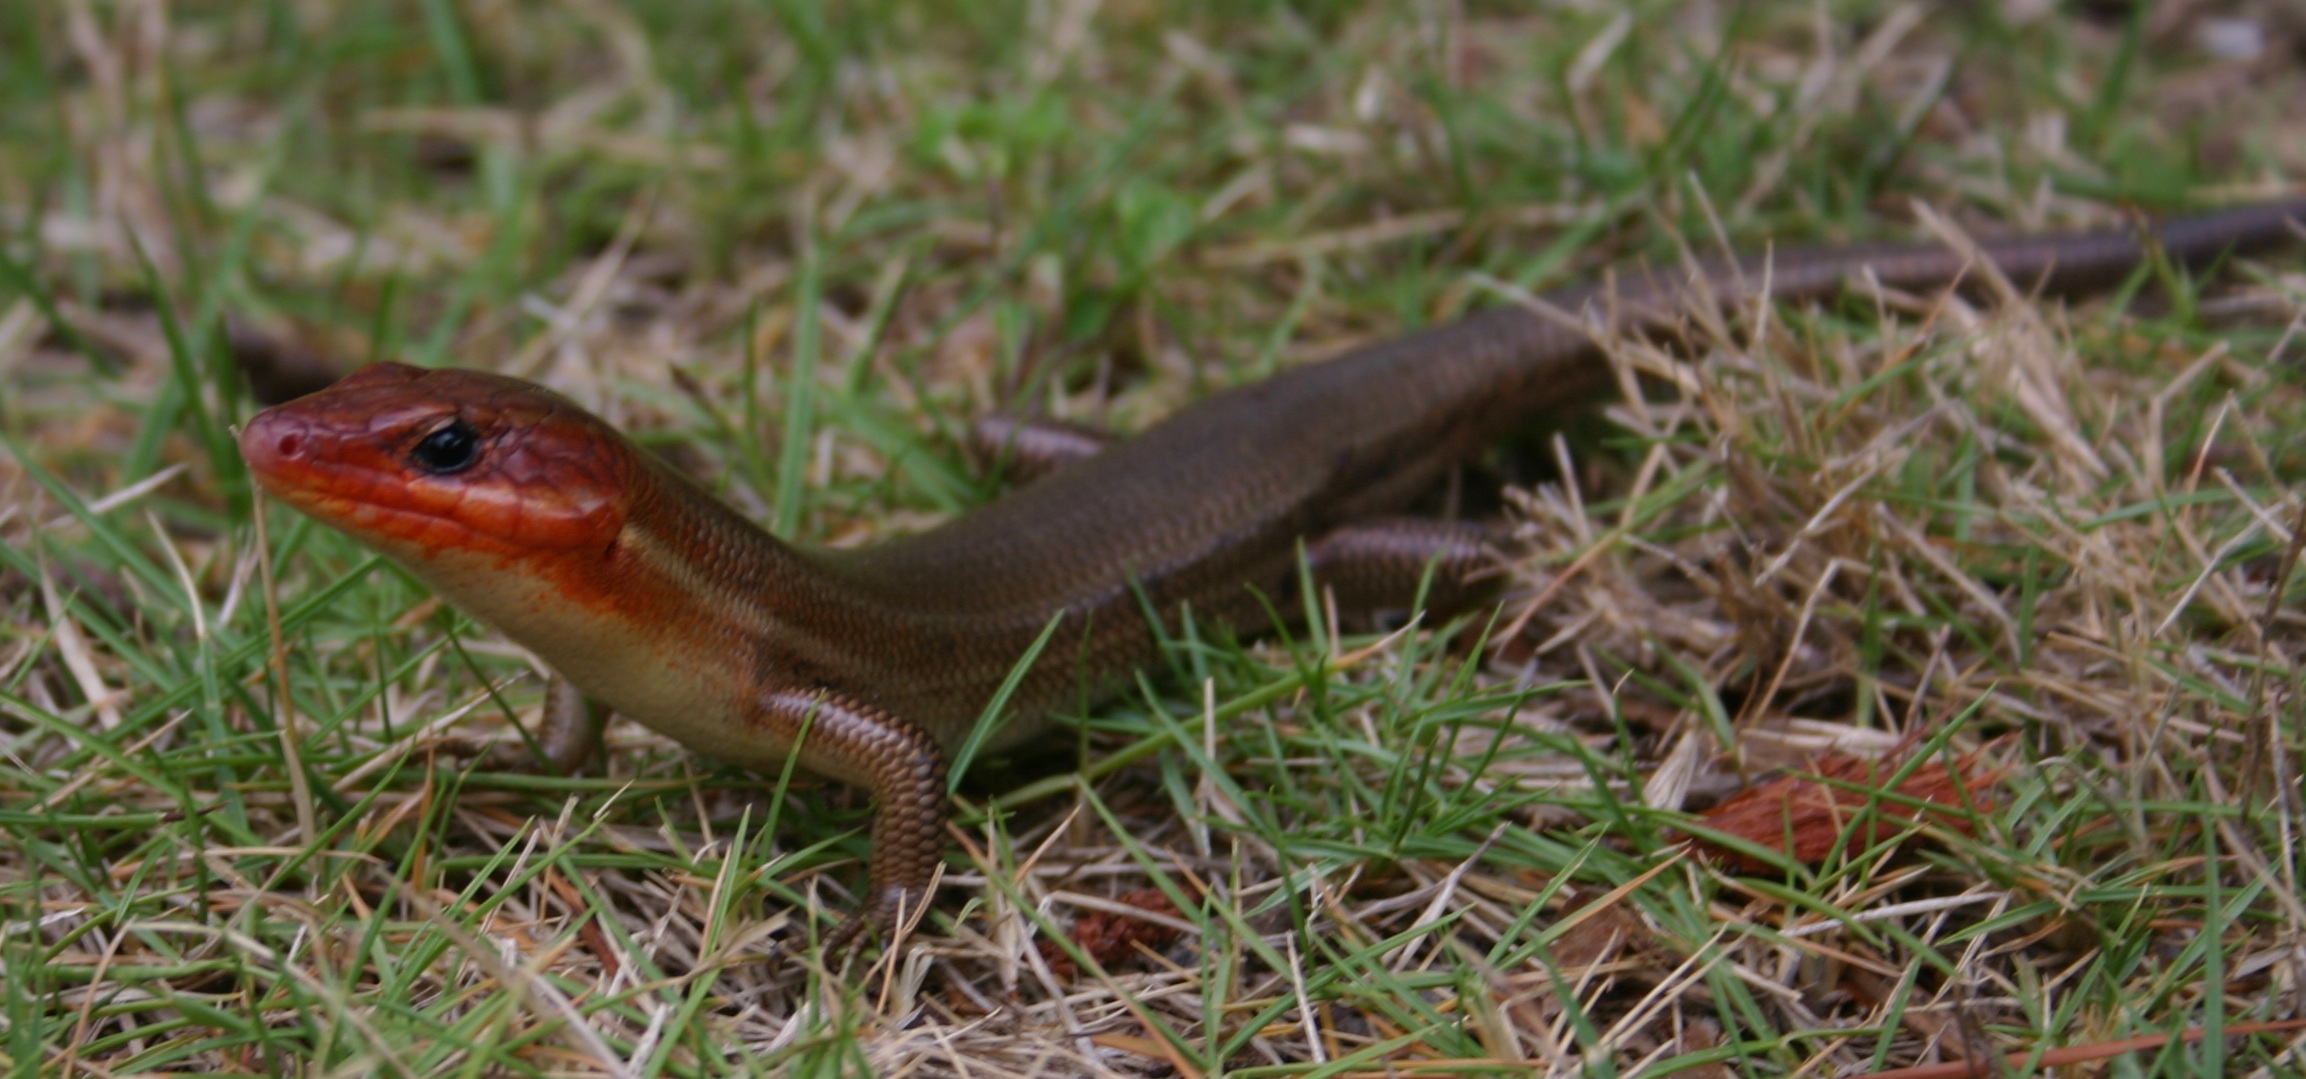 view of the skink